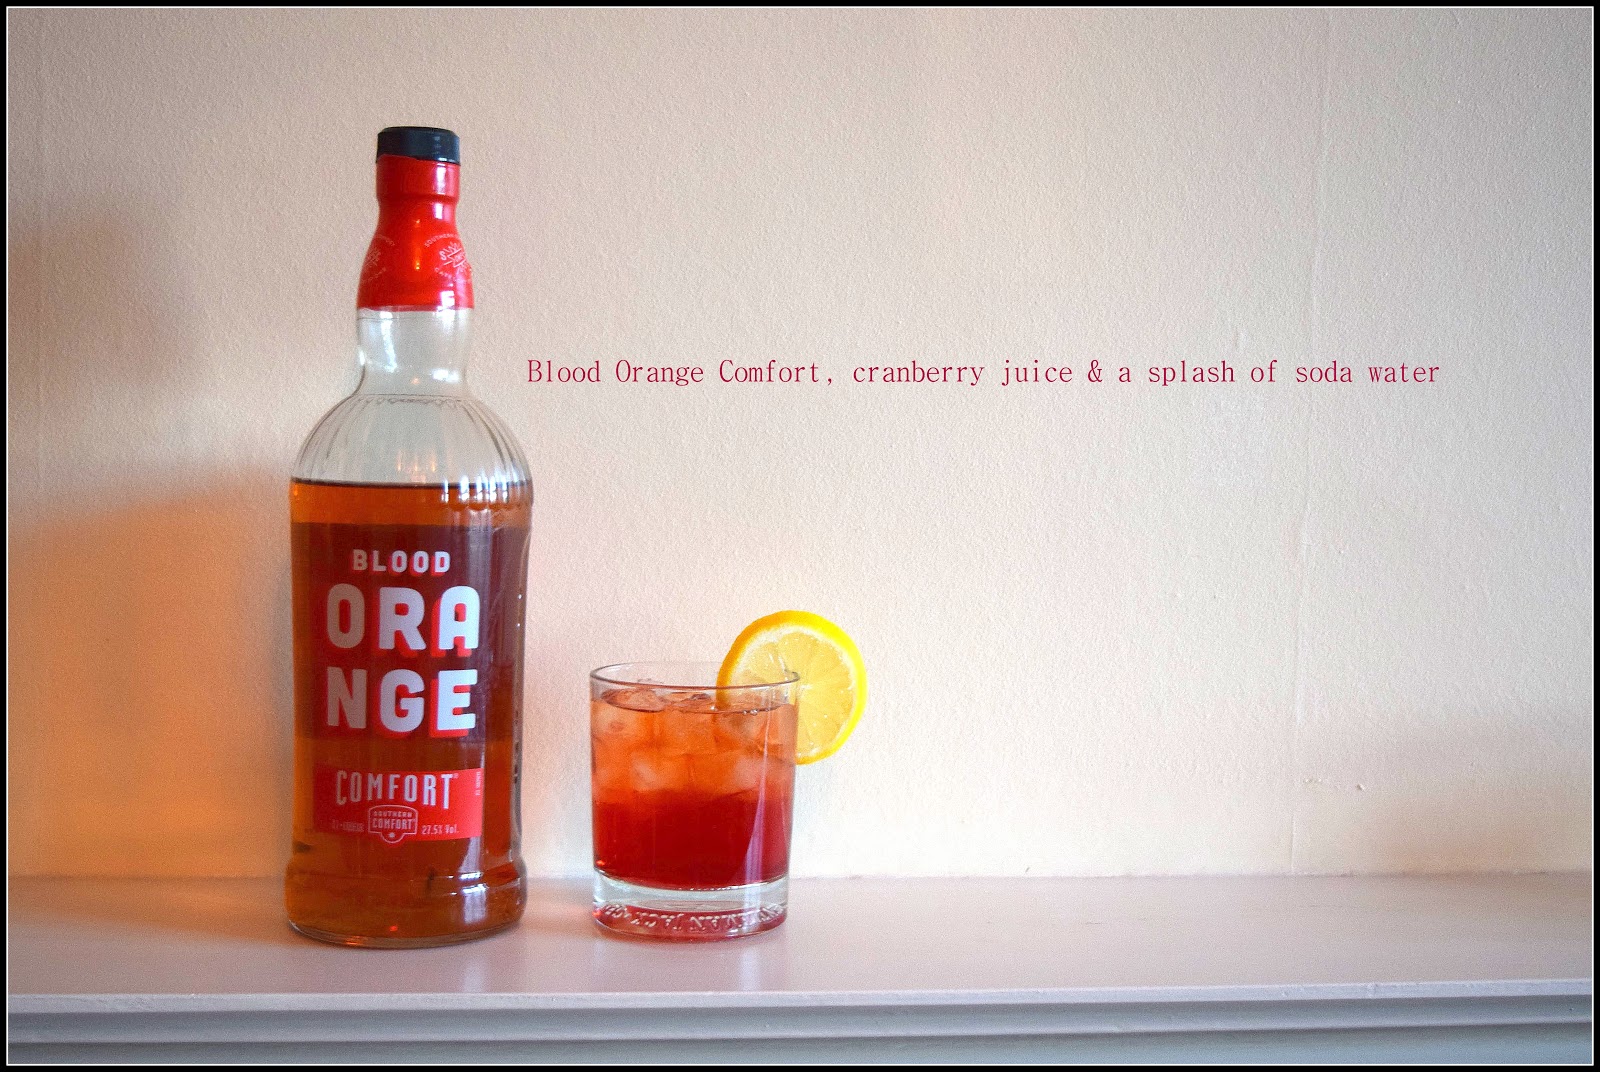 Southern Comfort launches Blood Orange